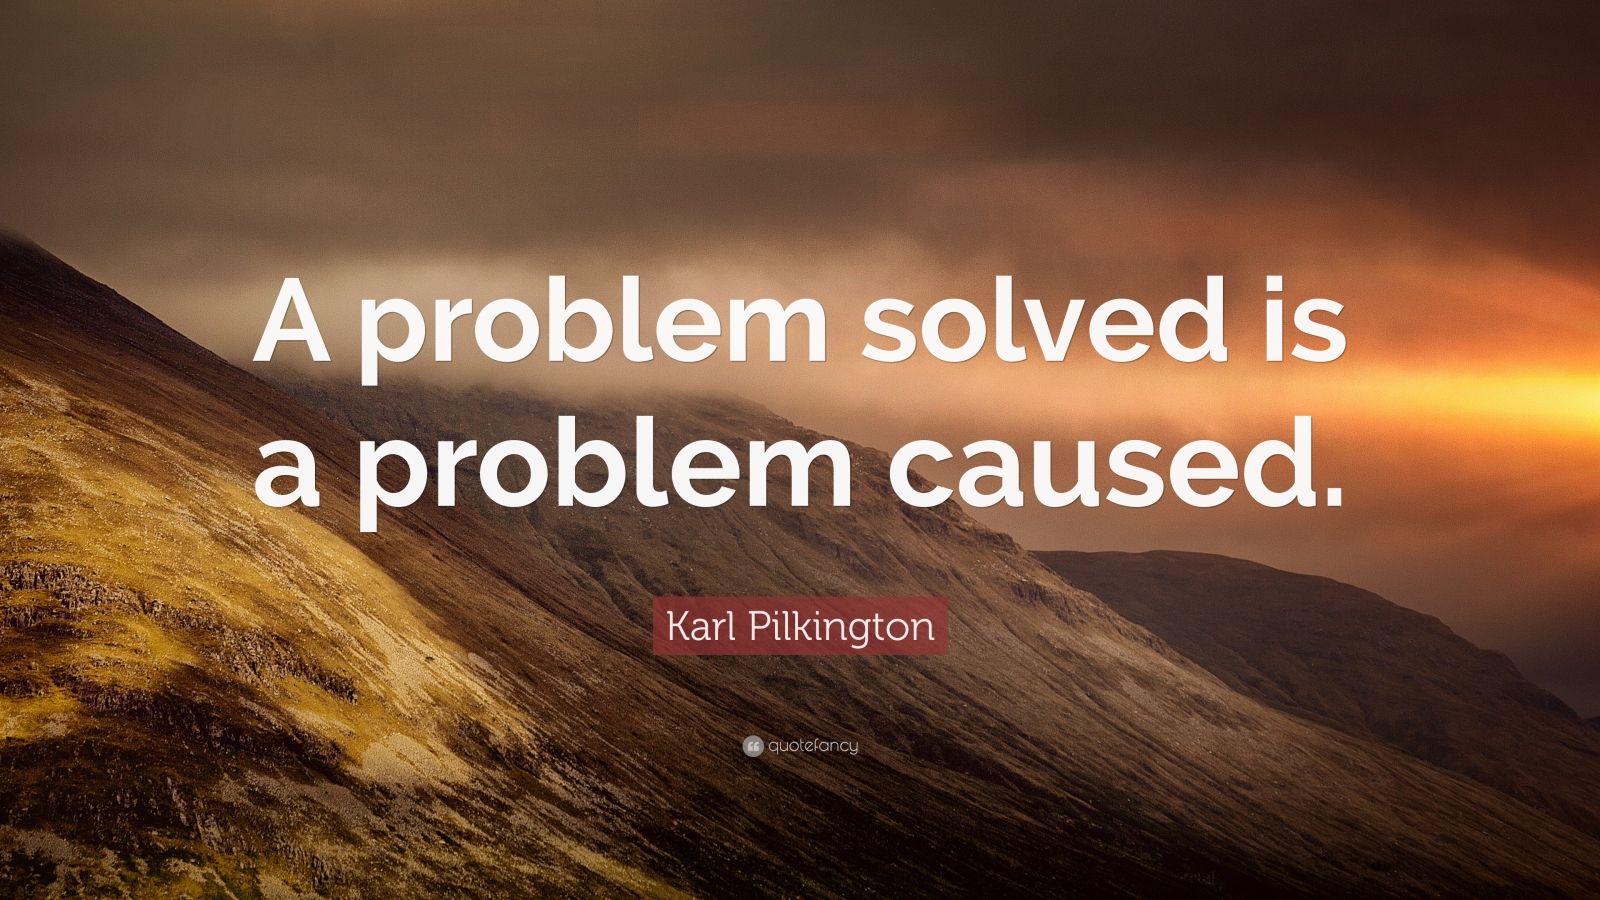 Karl Pilkington Quote: “A problem solved is a problem caused.” (7